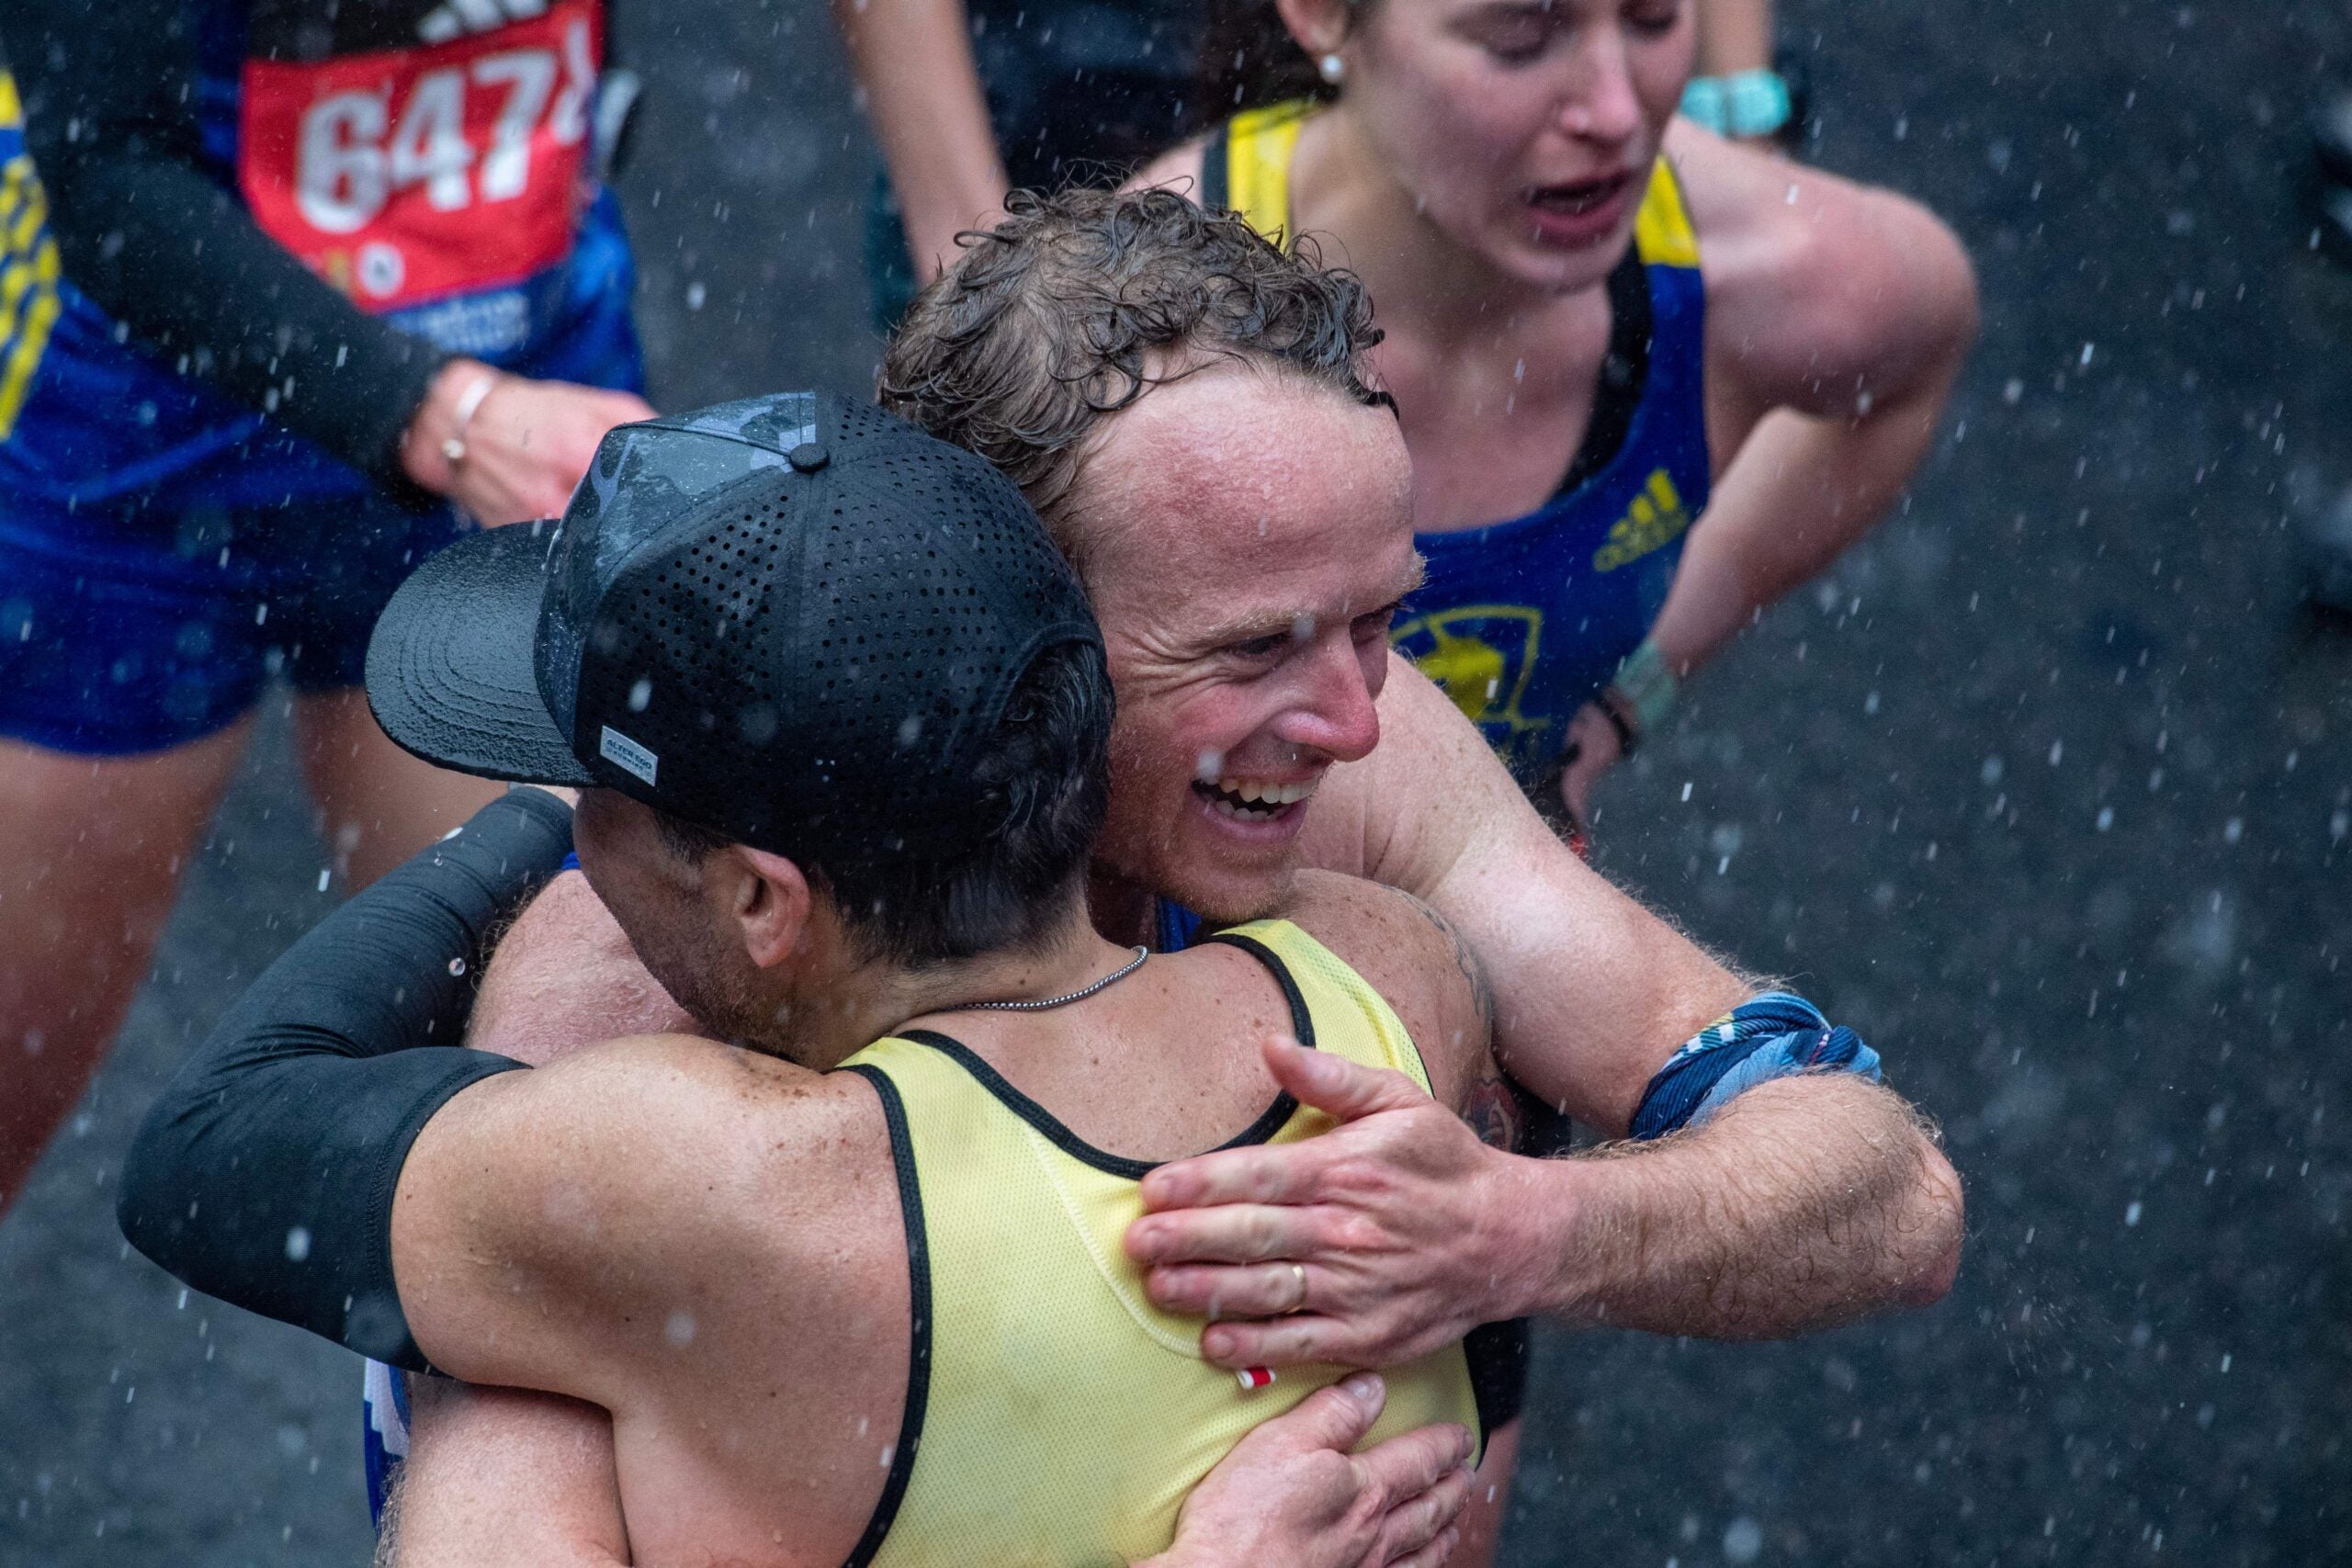 Runners embrace in the rain after finishing the race during the 127th Boston Marathon in Boston, Massachusetts.